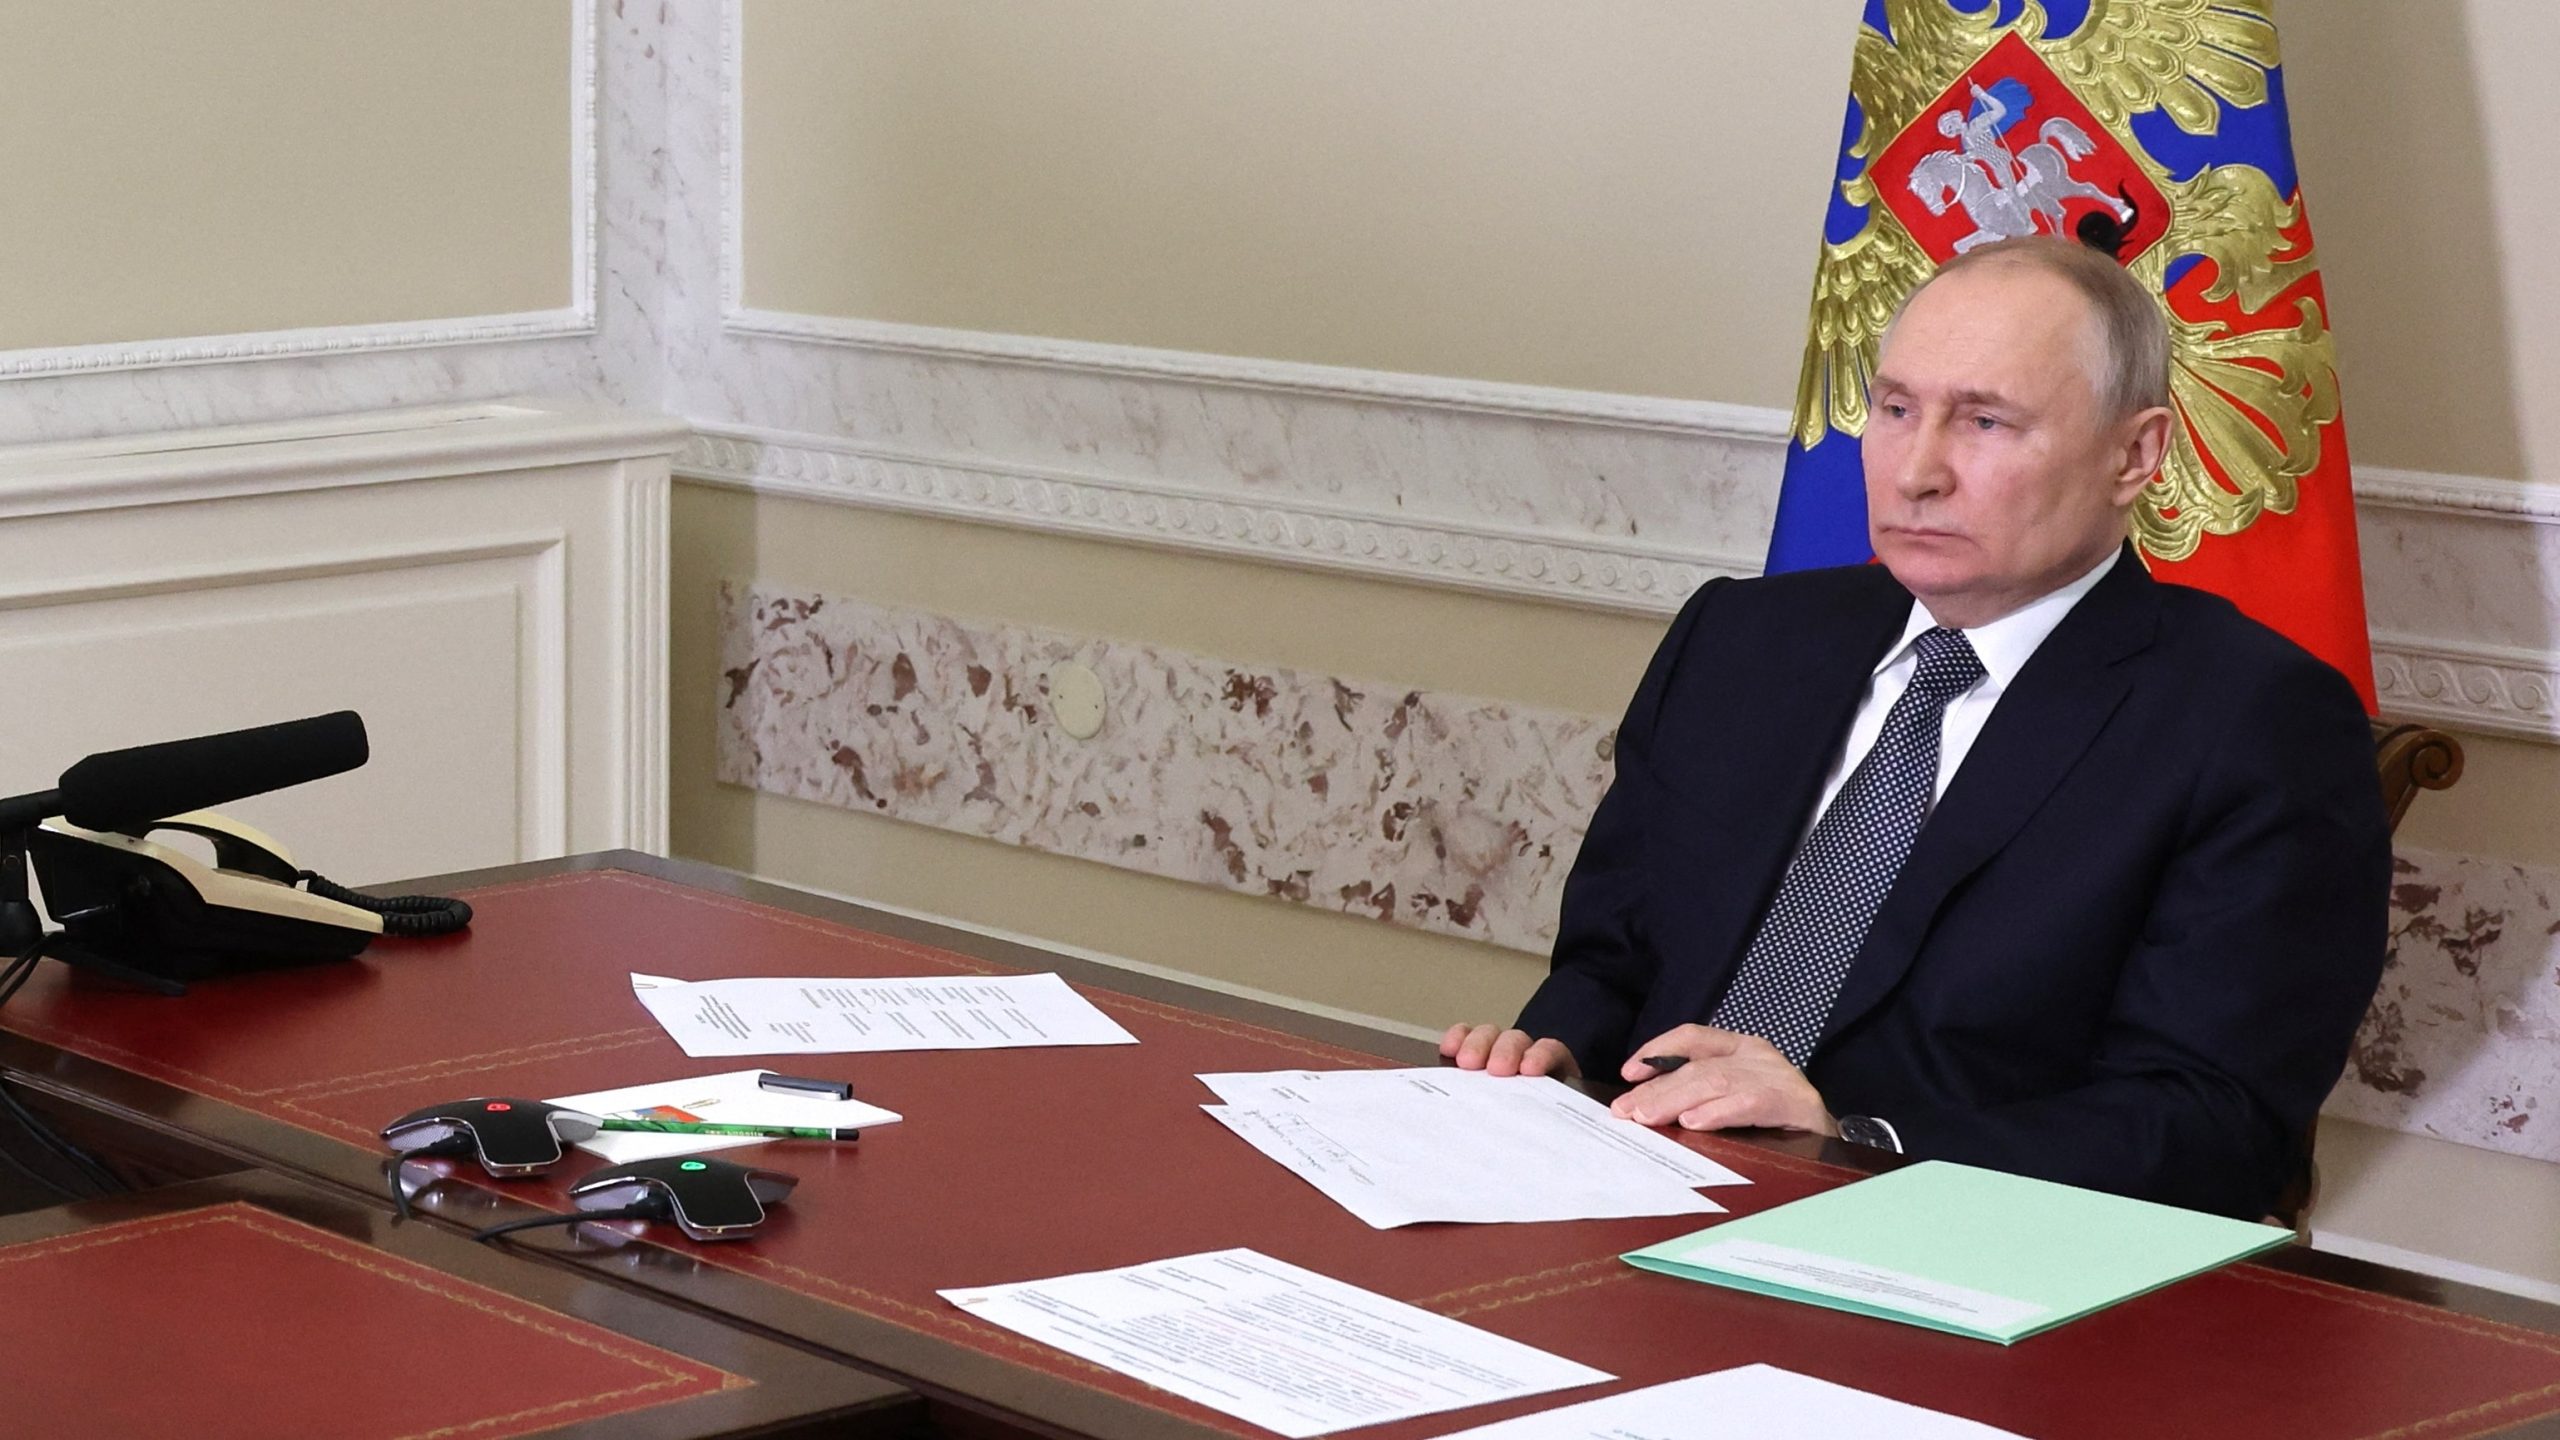 Russian President Vladimir Putin chairs a government meeting on tourism development in Russia via a video link from Saint Petersburg on May 2, 2023. (Photo by Mikhail KLIMENTYEV / SPUTNIK / AFP)